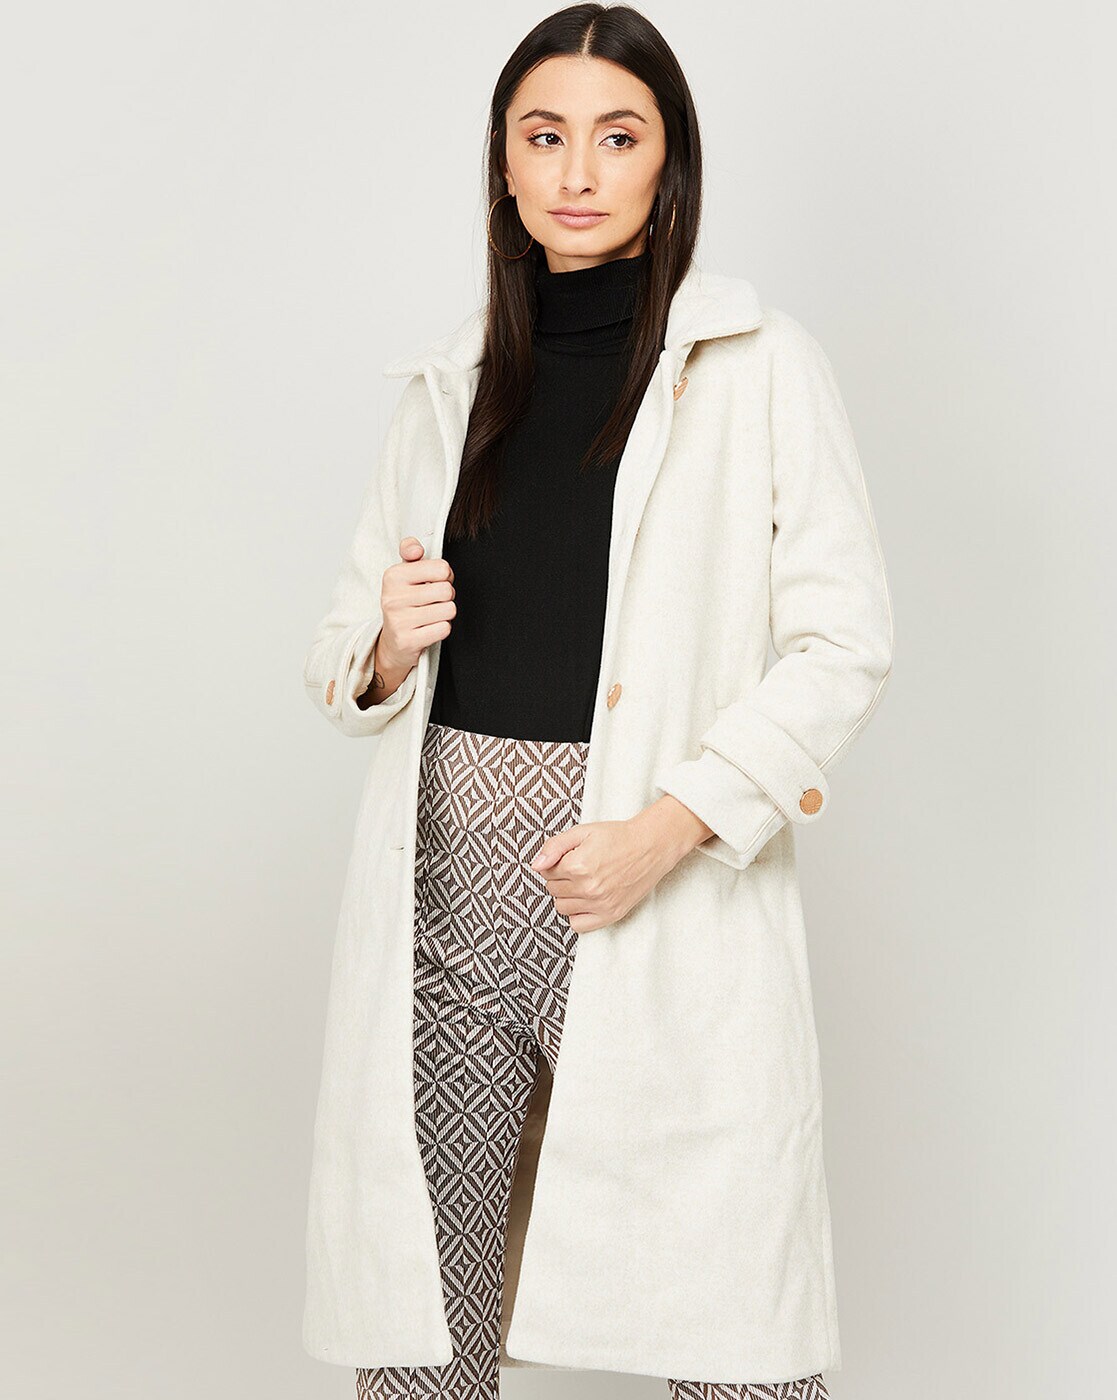 Buy Stylish White Coats Online for Women at Best Price | Myntra